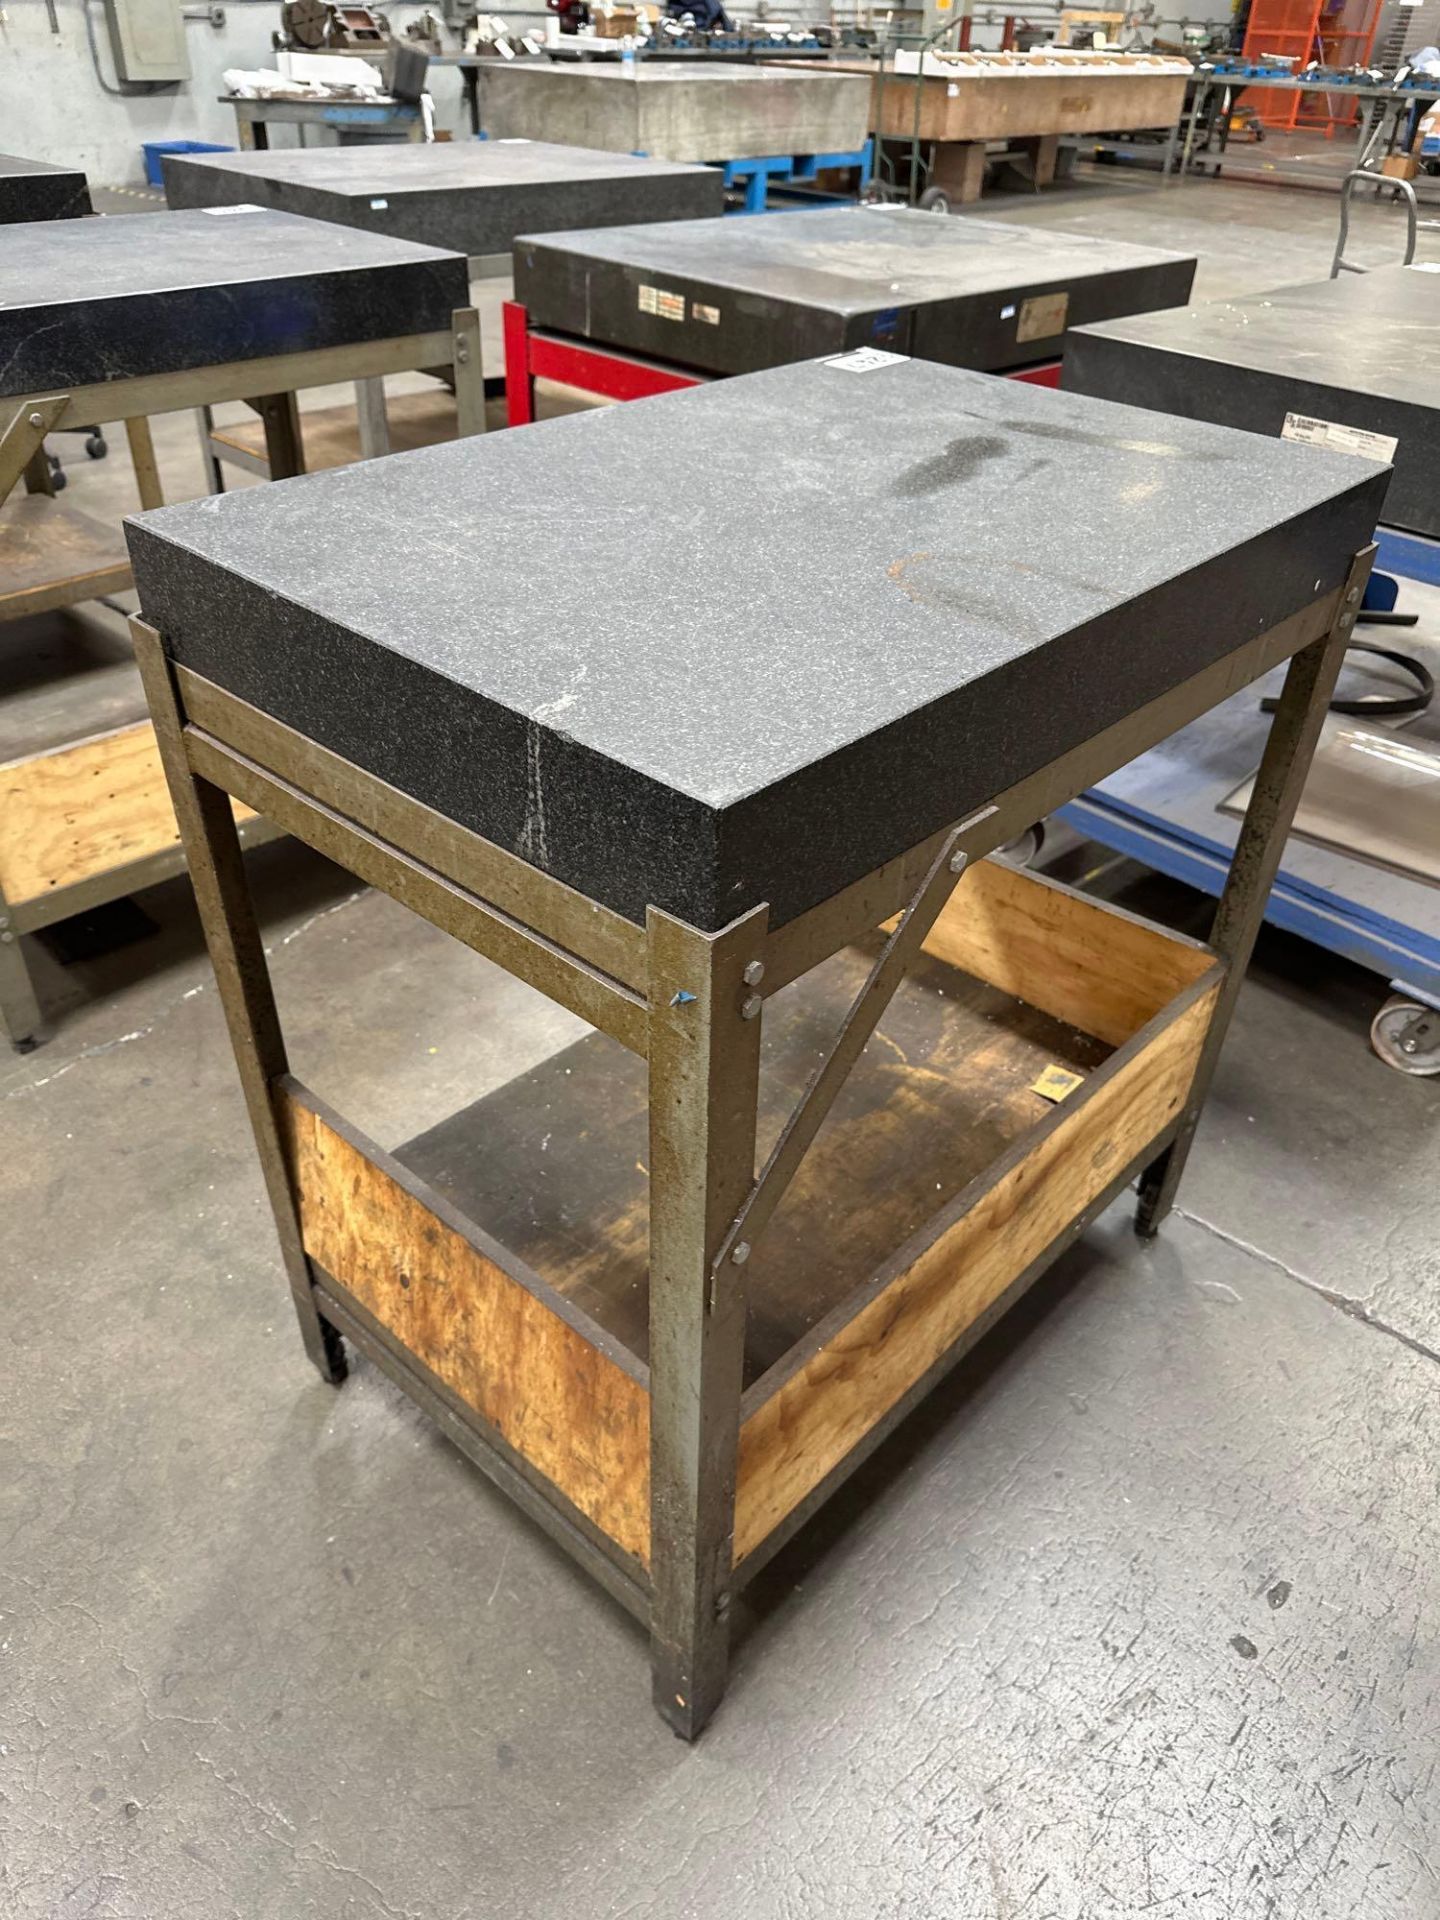 4” x 24” x 36” Granite Surface Plate w/ Steel Stand - Image 4 of 4